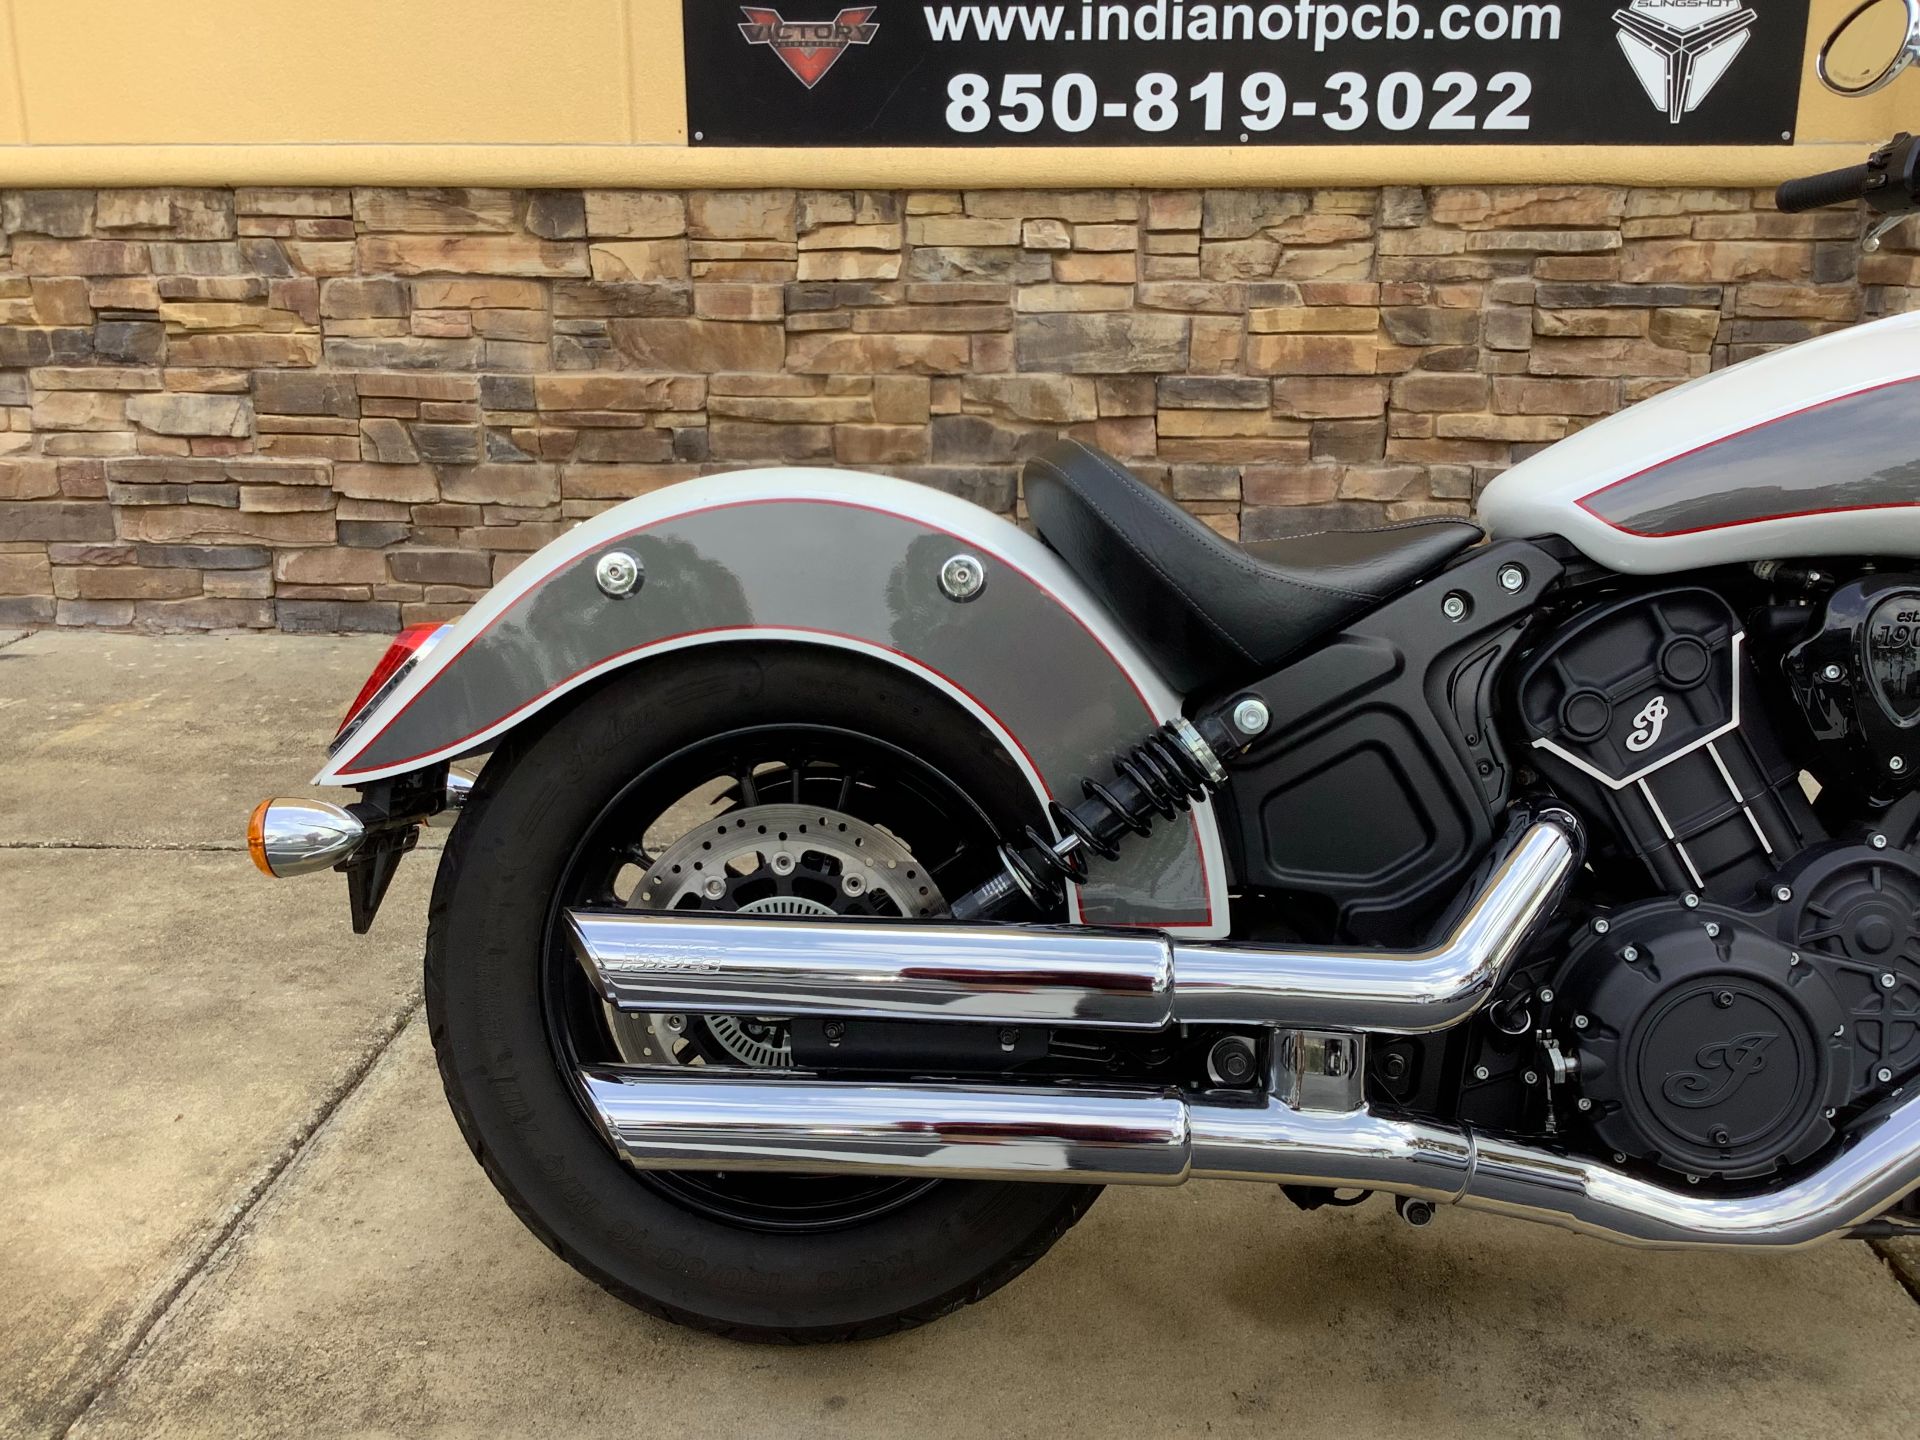 2020 Indian Motorcycle SCOUT SIXTY ABS in Panama City Beach, Florida - Photo 8